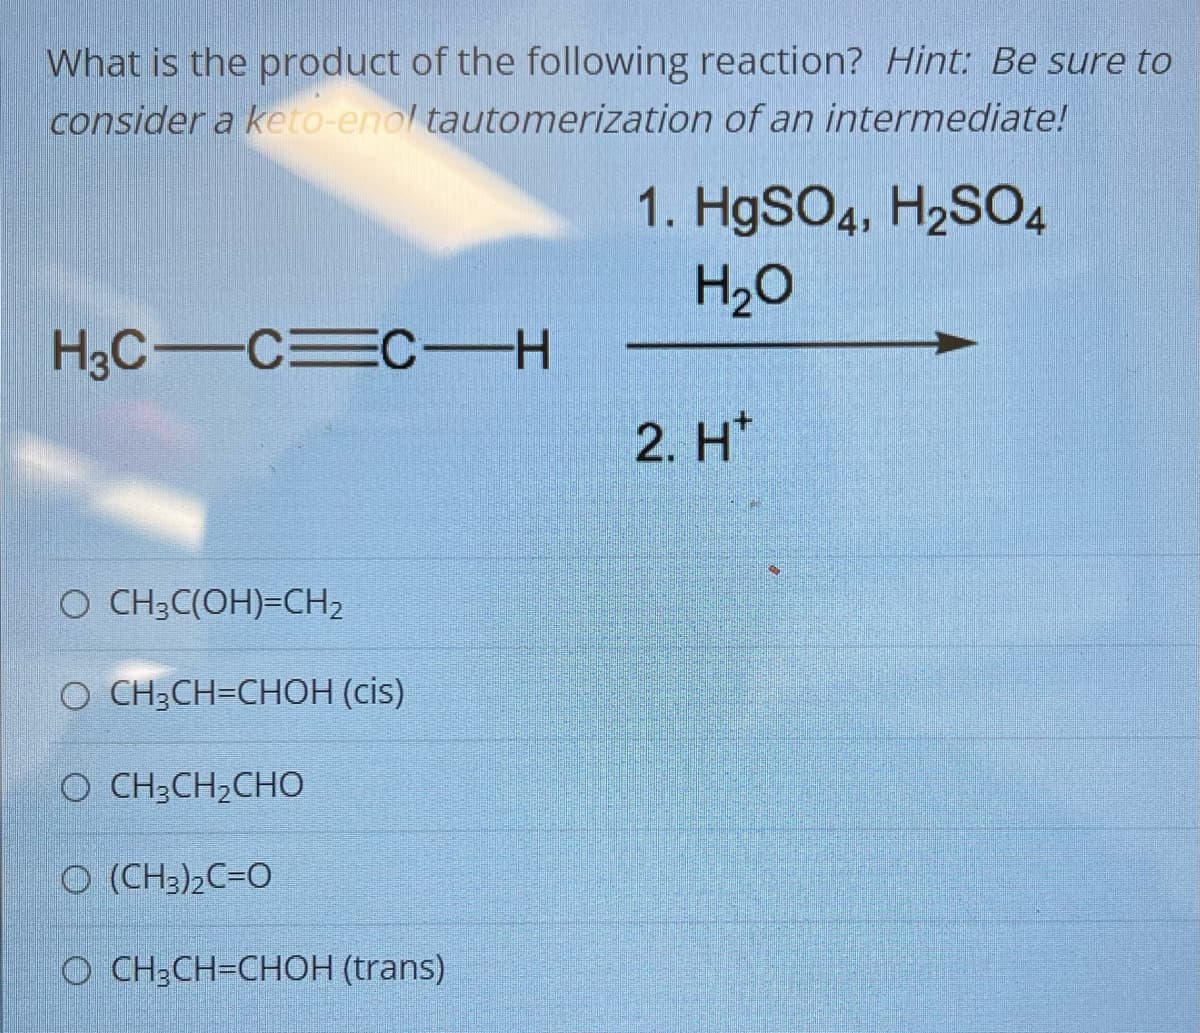 What is the product of the following reaction? Hint: Be sure to
consider a keto-enol tautomerization of an intermediate!
H3C C C-H
O CH3C(OH)=CH₂
O CH₂CH=CHOH (cis)
O CH3CH2CHO
O (CH3)2C=O
O CH₂CH=CHOH (trans)
1. HgSO4, H₂SO4
H₂O
2. H*